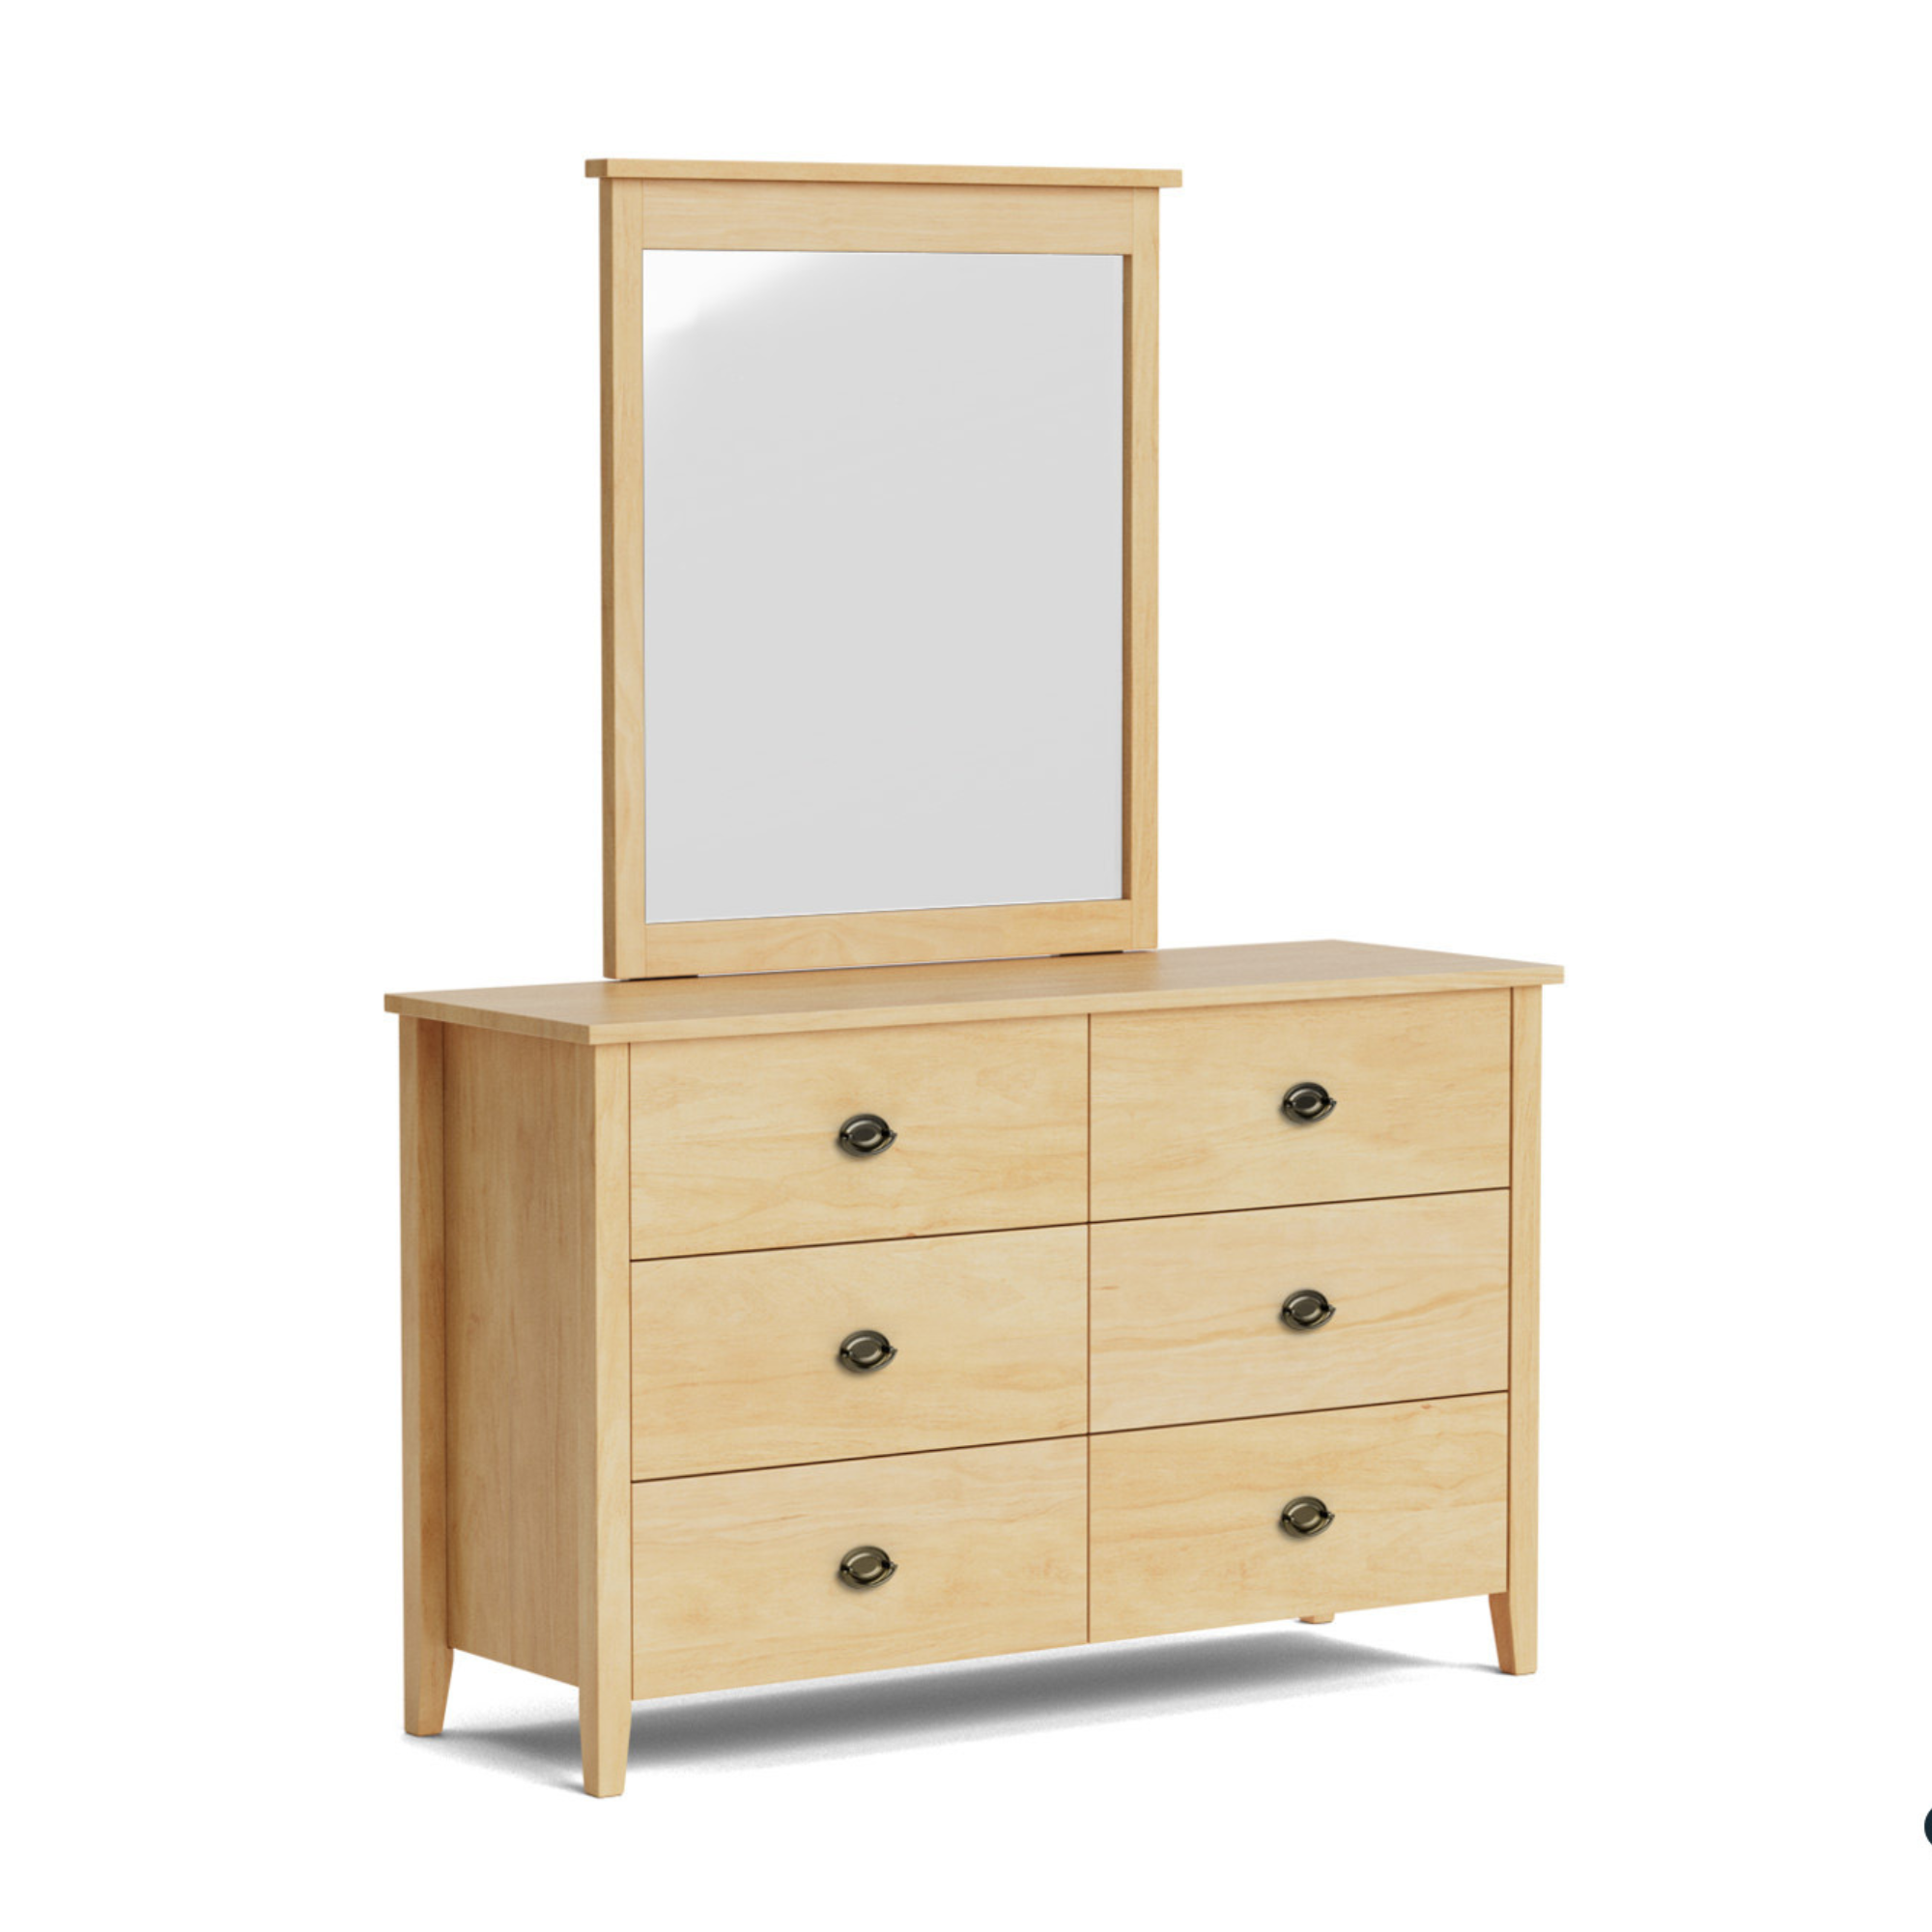 IVYDALE 6 DRAWER DUCHESS WITH MIRROR | PINE OR AMERICAN ASH | NZ MADE